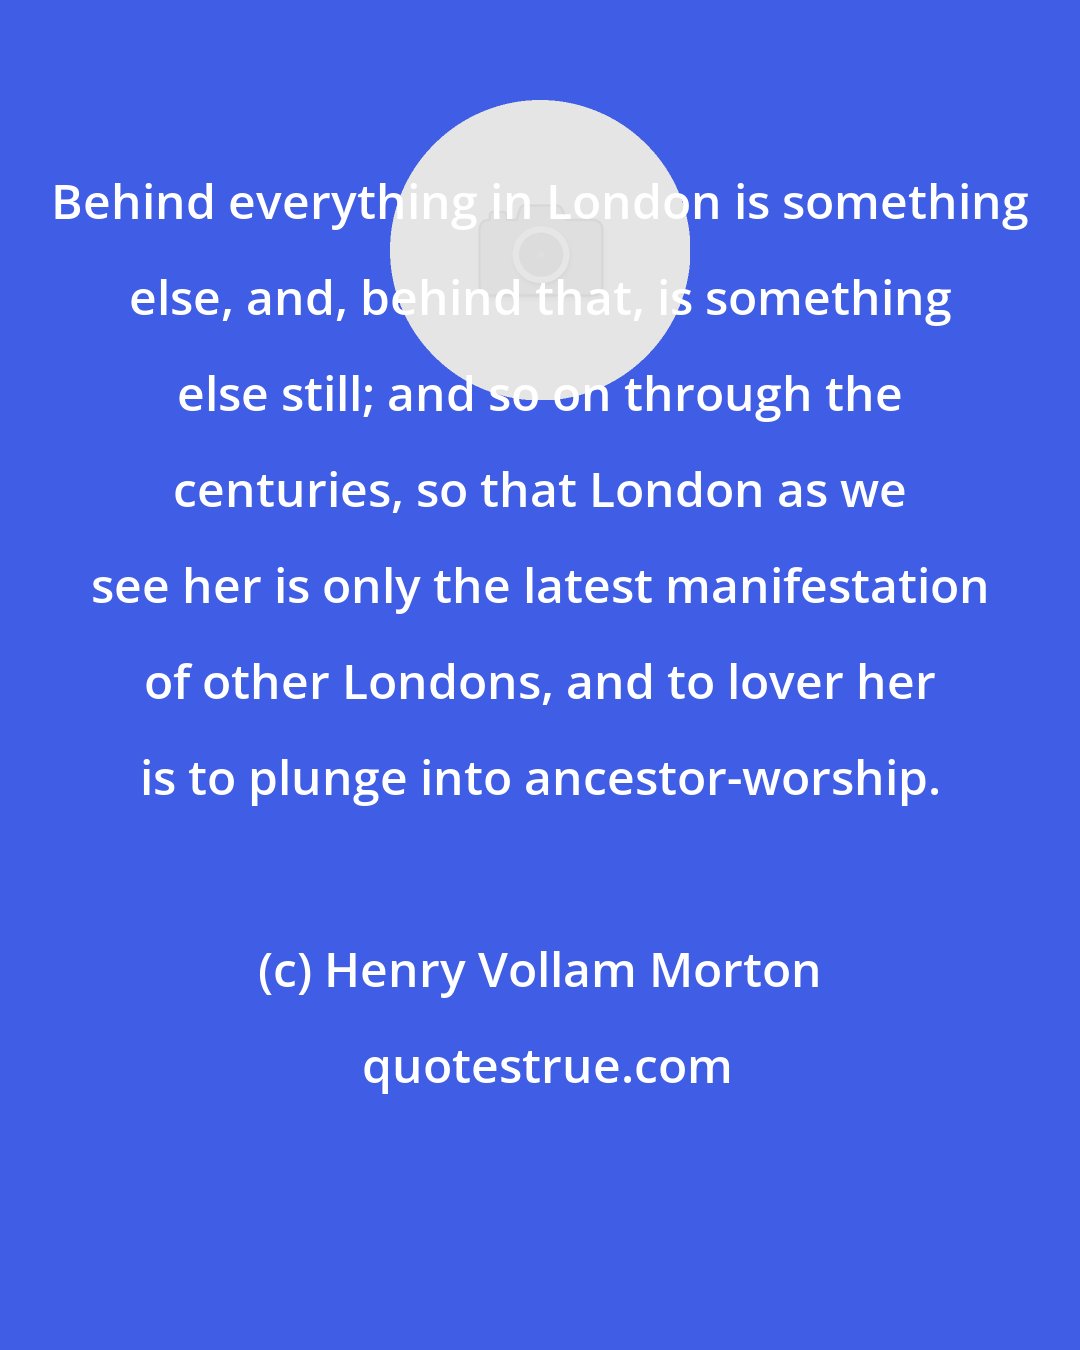 Henry Vollam Morton: Behind everything in London is something else, and, behind that, is something else still; and so on through the centuries, so that London as we see her is only the latest manifestation of other Londons, and to lover her is to plunge into ancestor-worship.